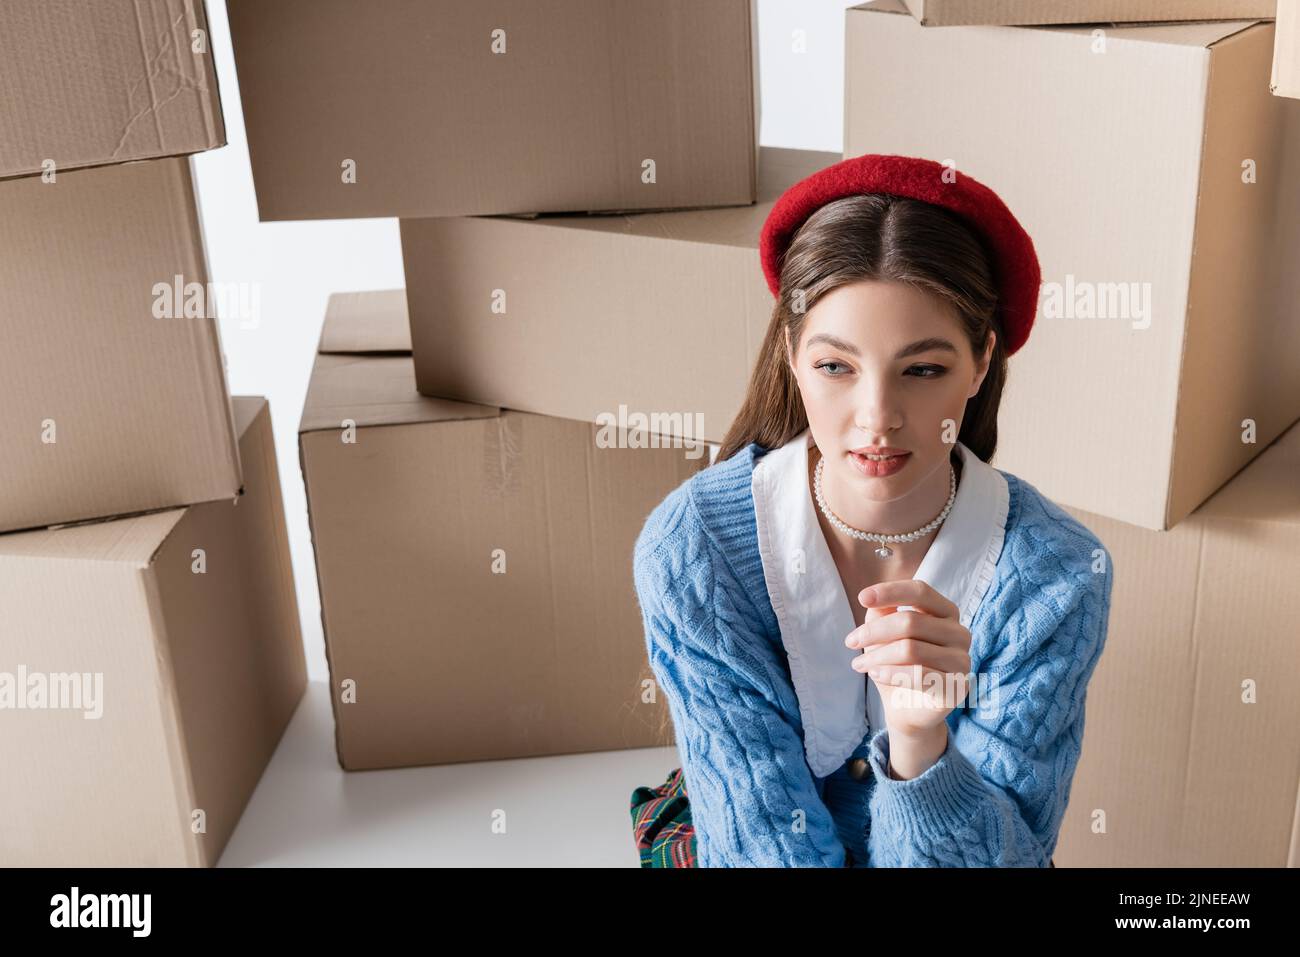 Pretty model in beret looking away near cardboard boxes on white background Stock Photo